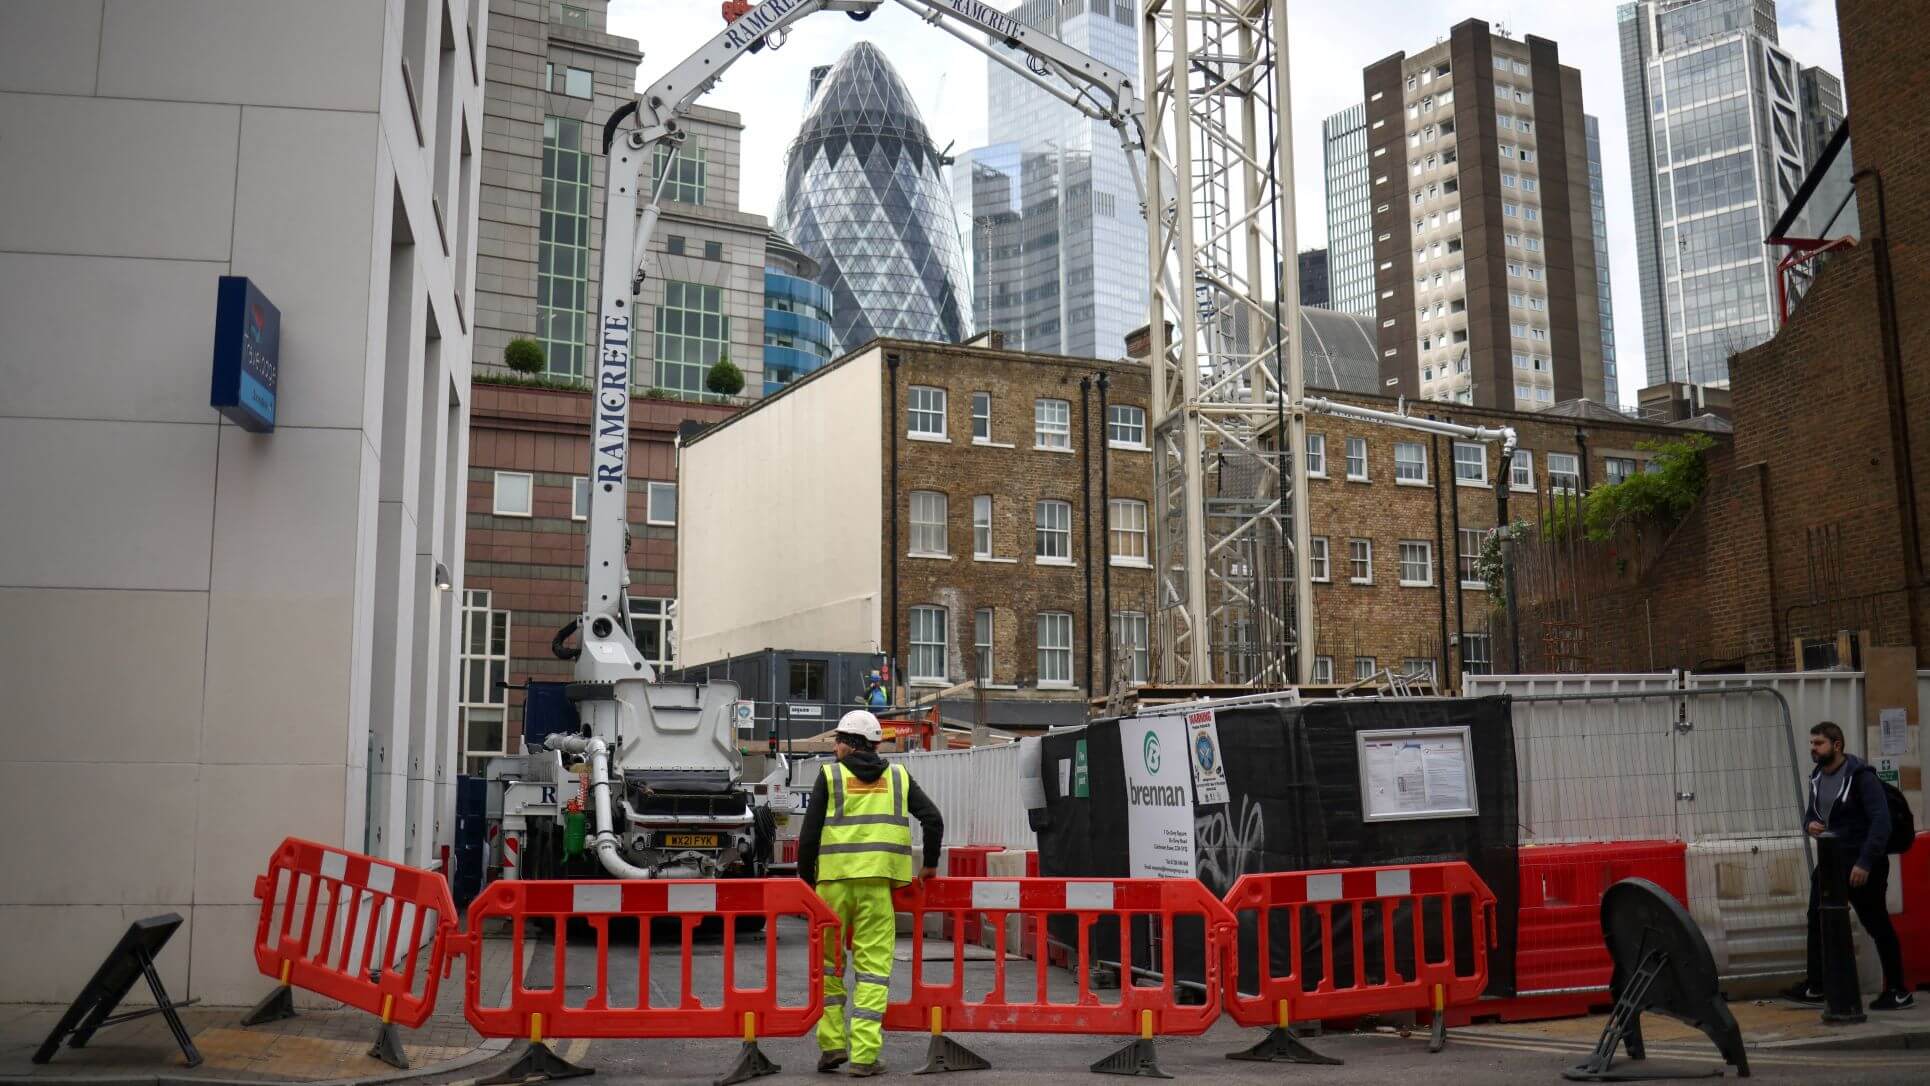 UK Construction Sector Rebounds In February - PMI